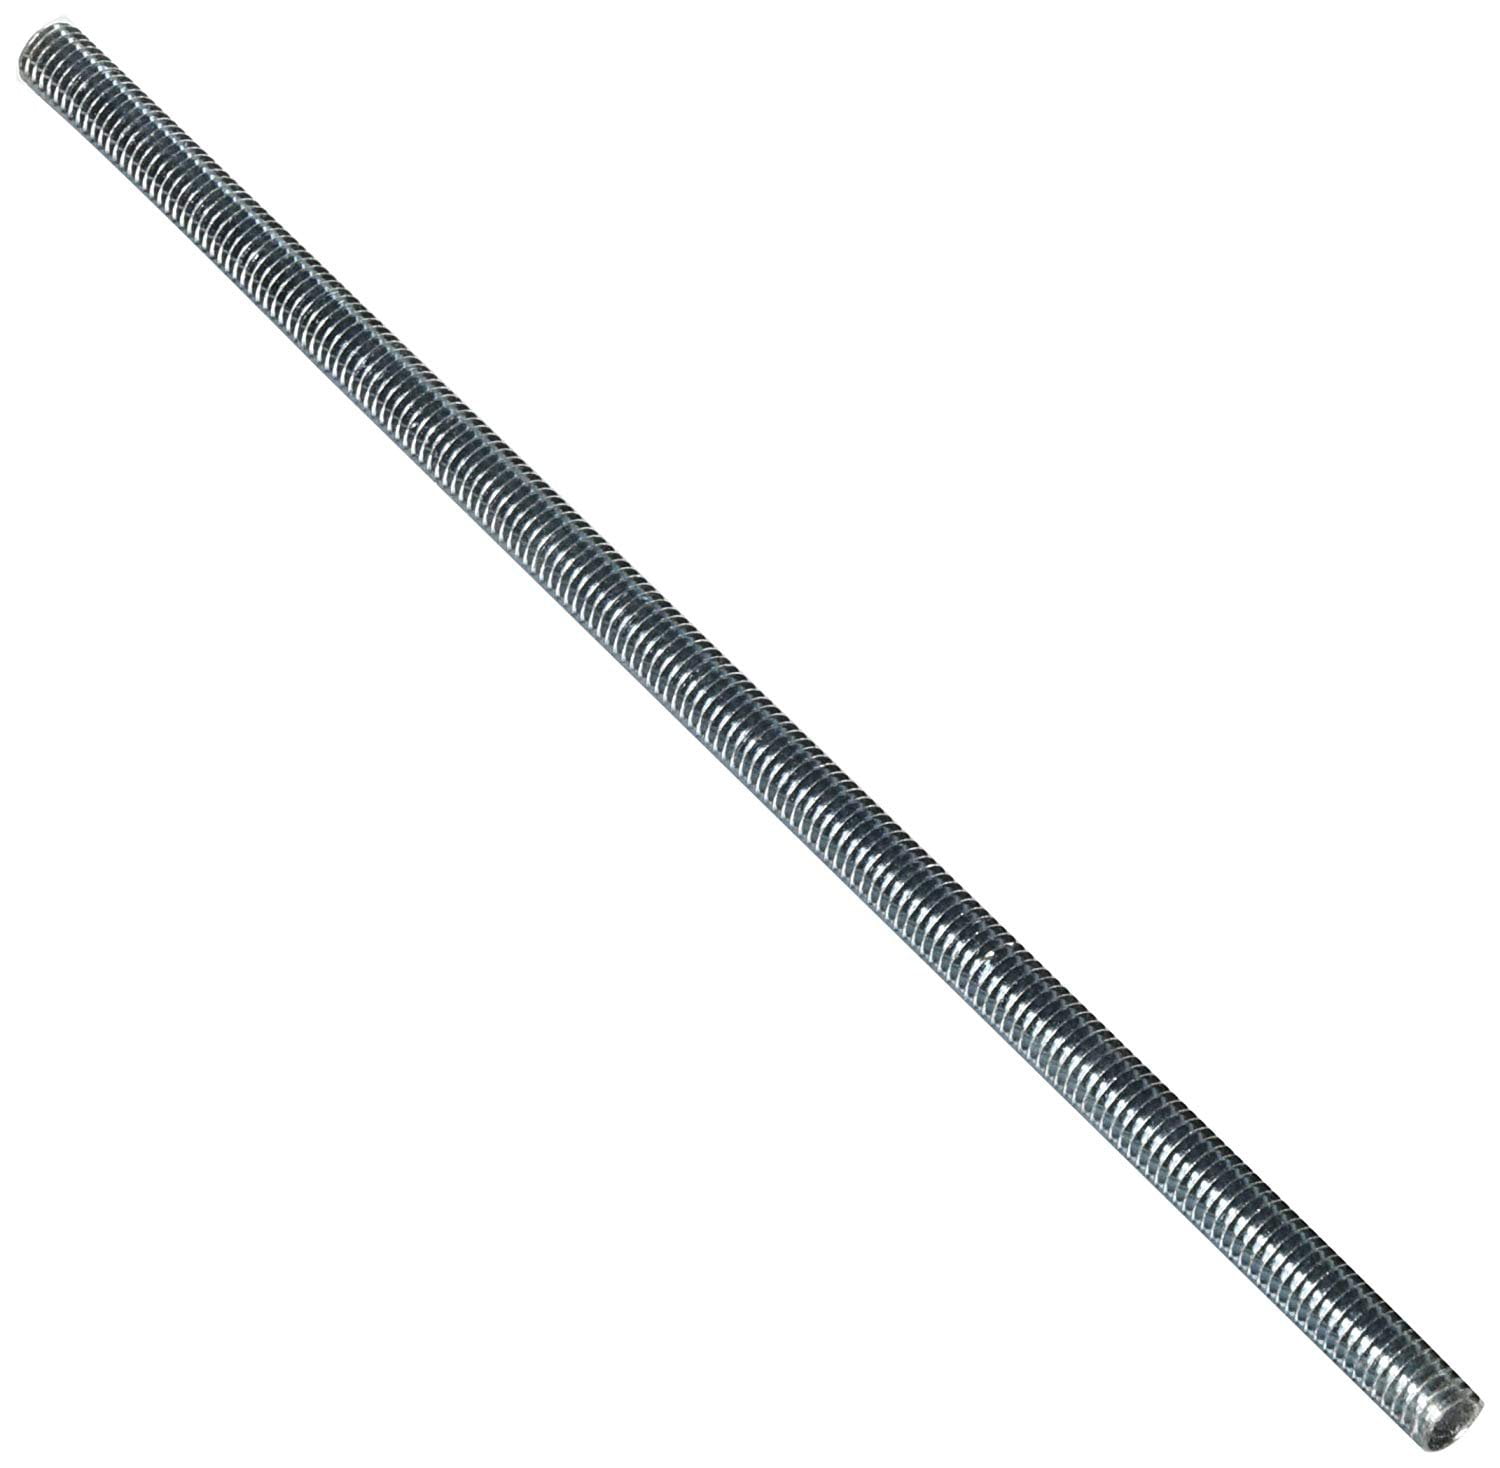 1"-8 X 12" Long Zinc Plated Threaded Rod All Thread  New Open Box 10 Pack 1ft